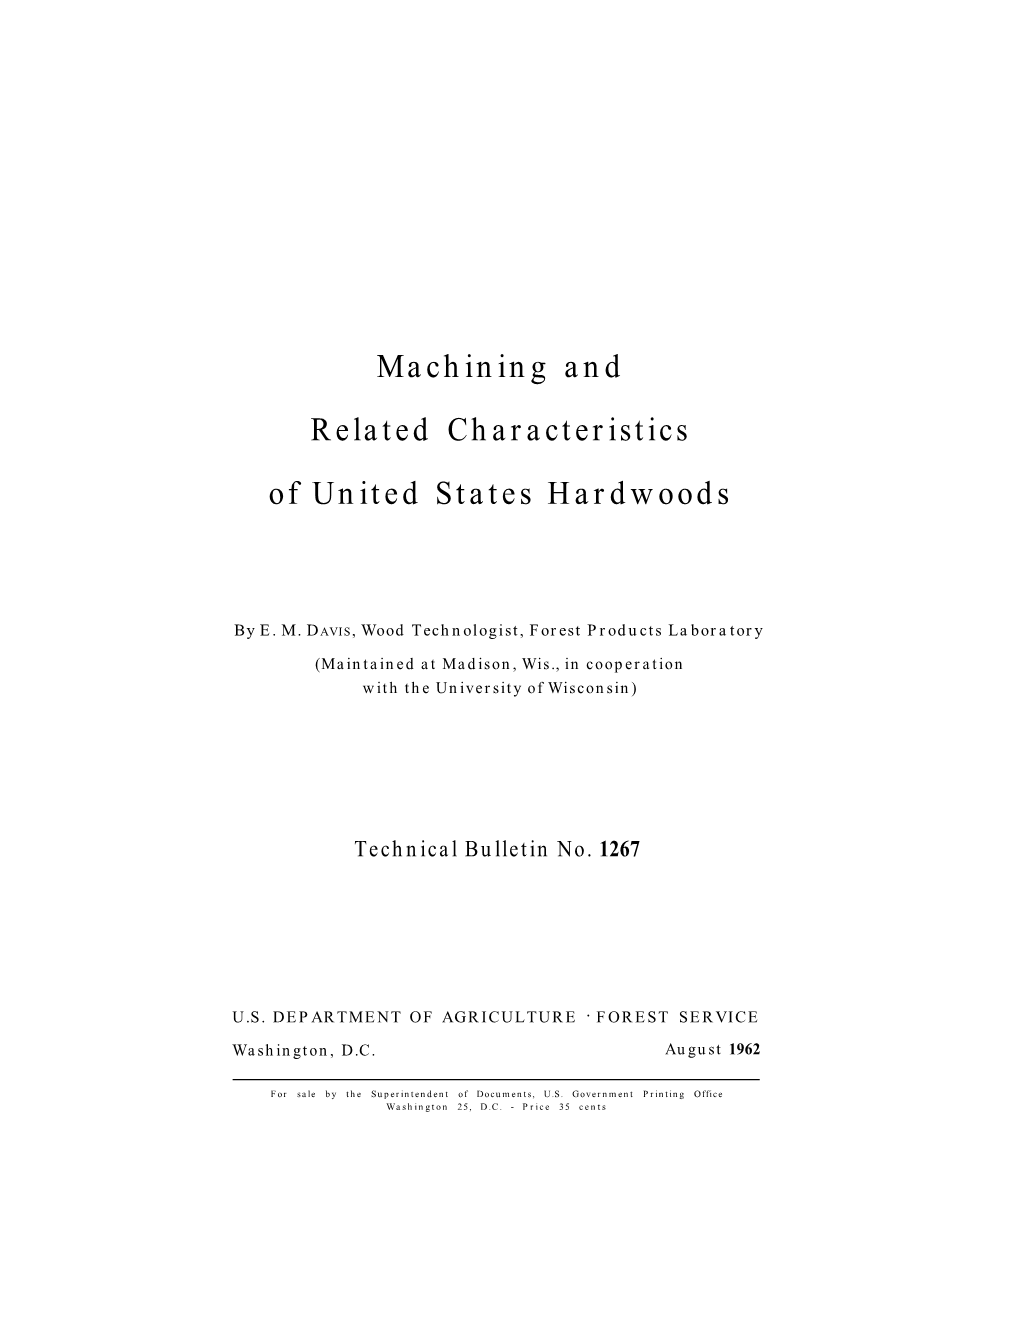 Machining and Related Characteristics of United States Hardwoods